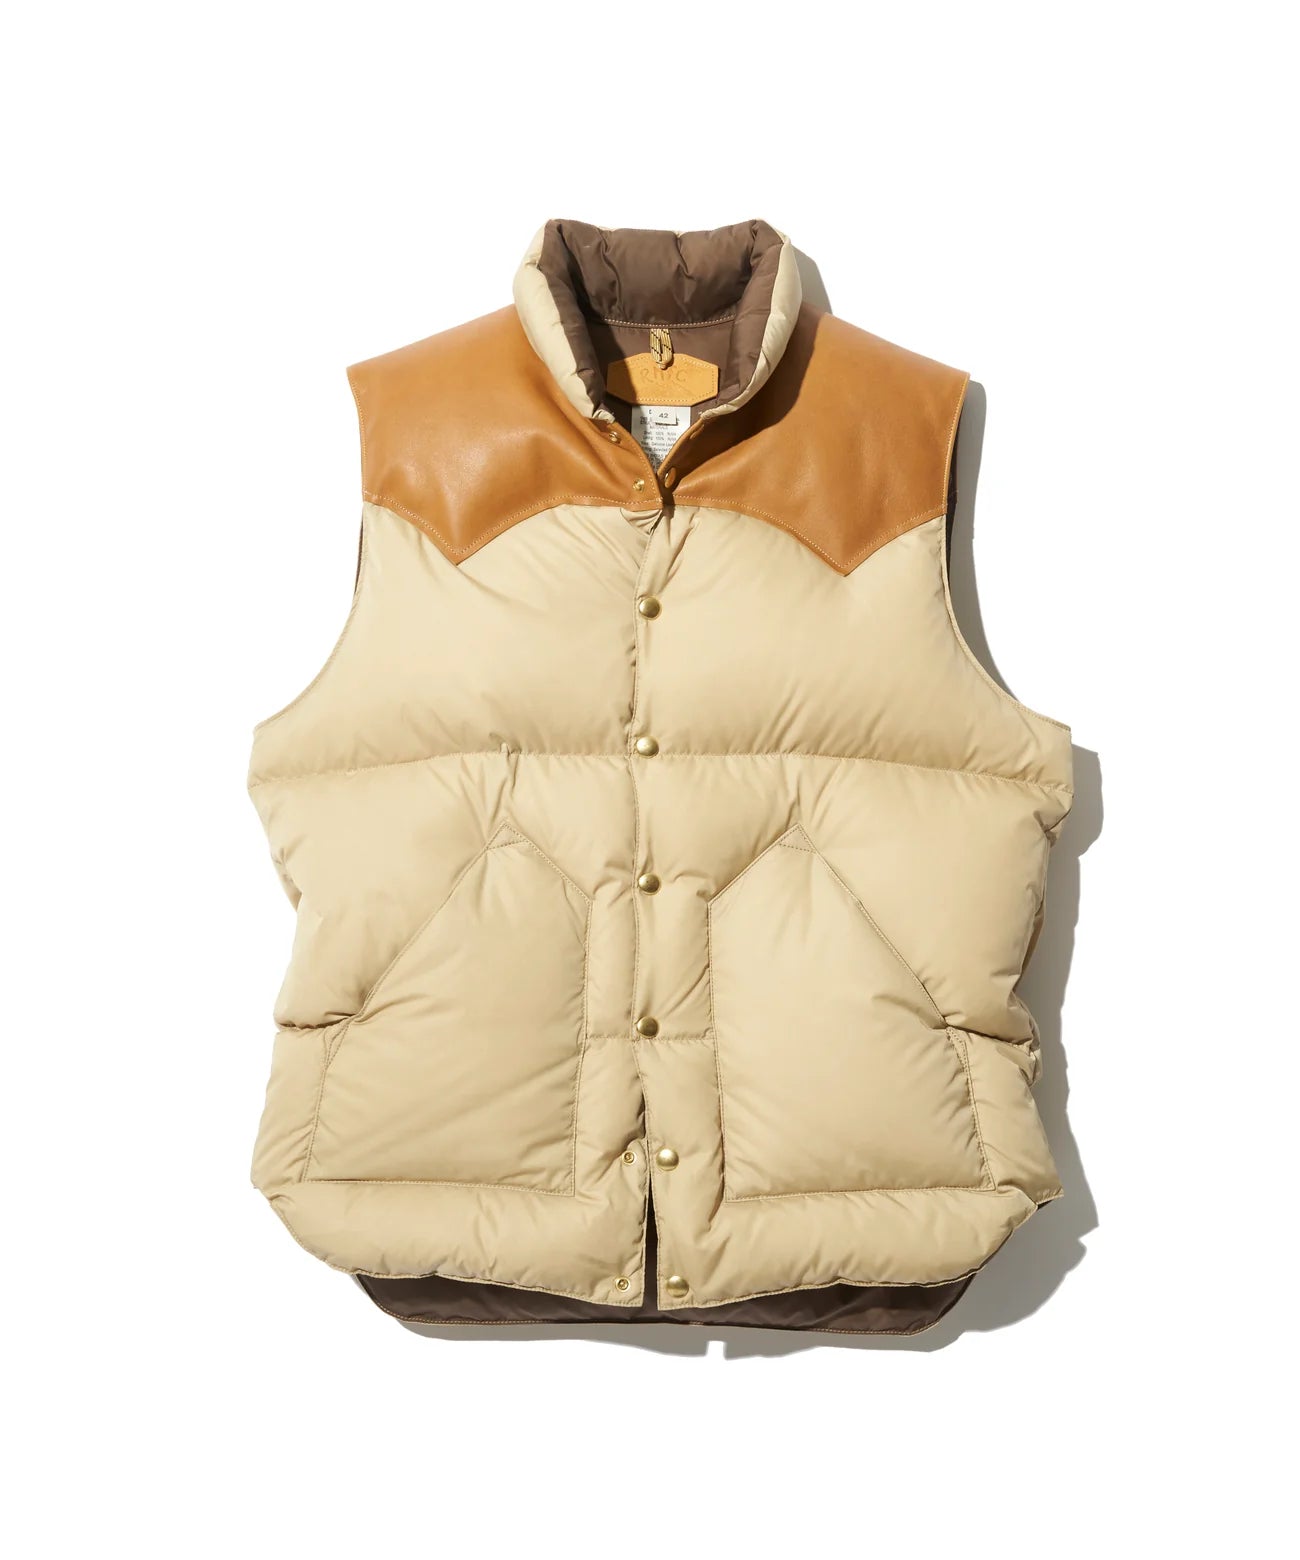 ROCKY MOUNTAIN FEATHERBED DOWN VEST – Blue Works Vintage Clothing 